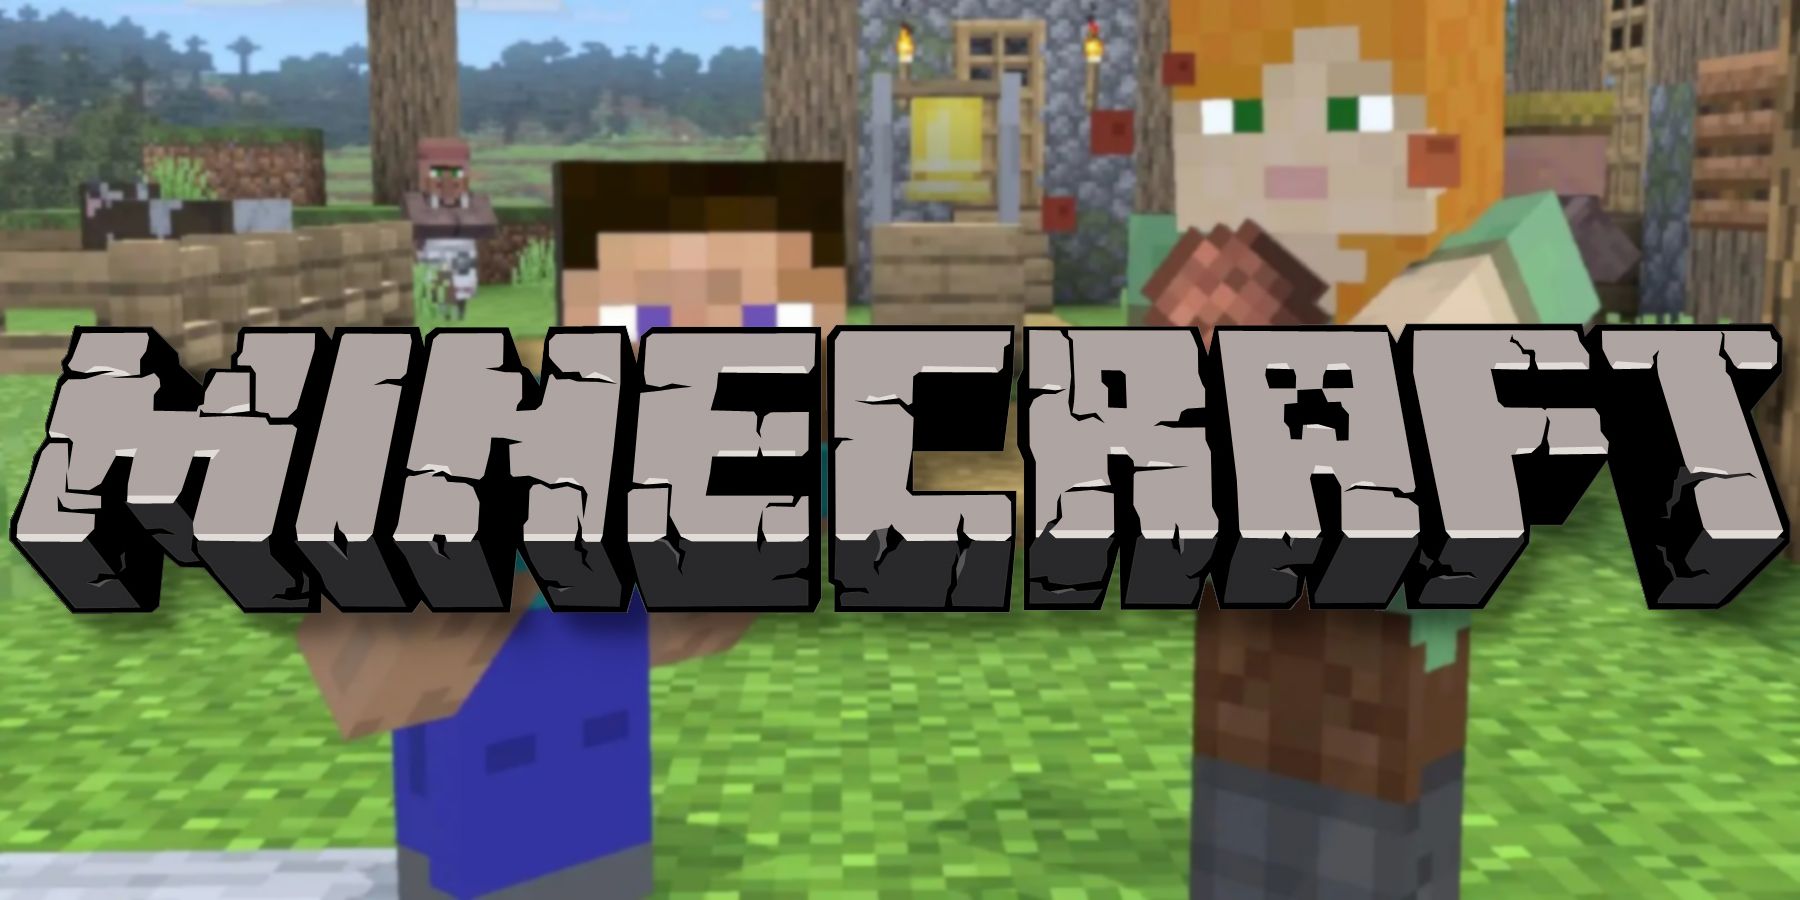 The Minecraft logo in the center with Steve and Alex behind it.